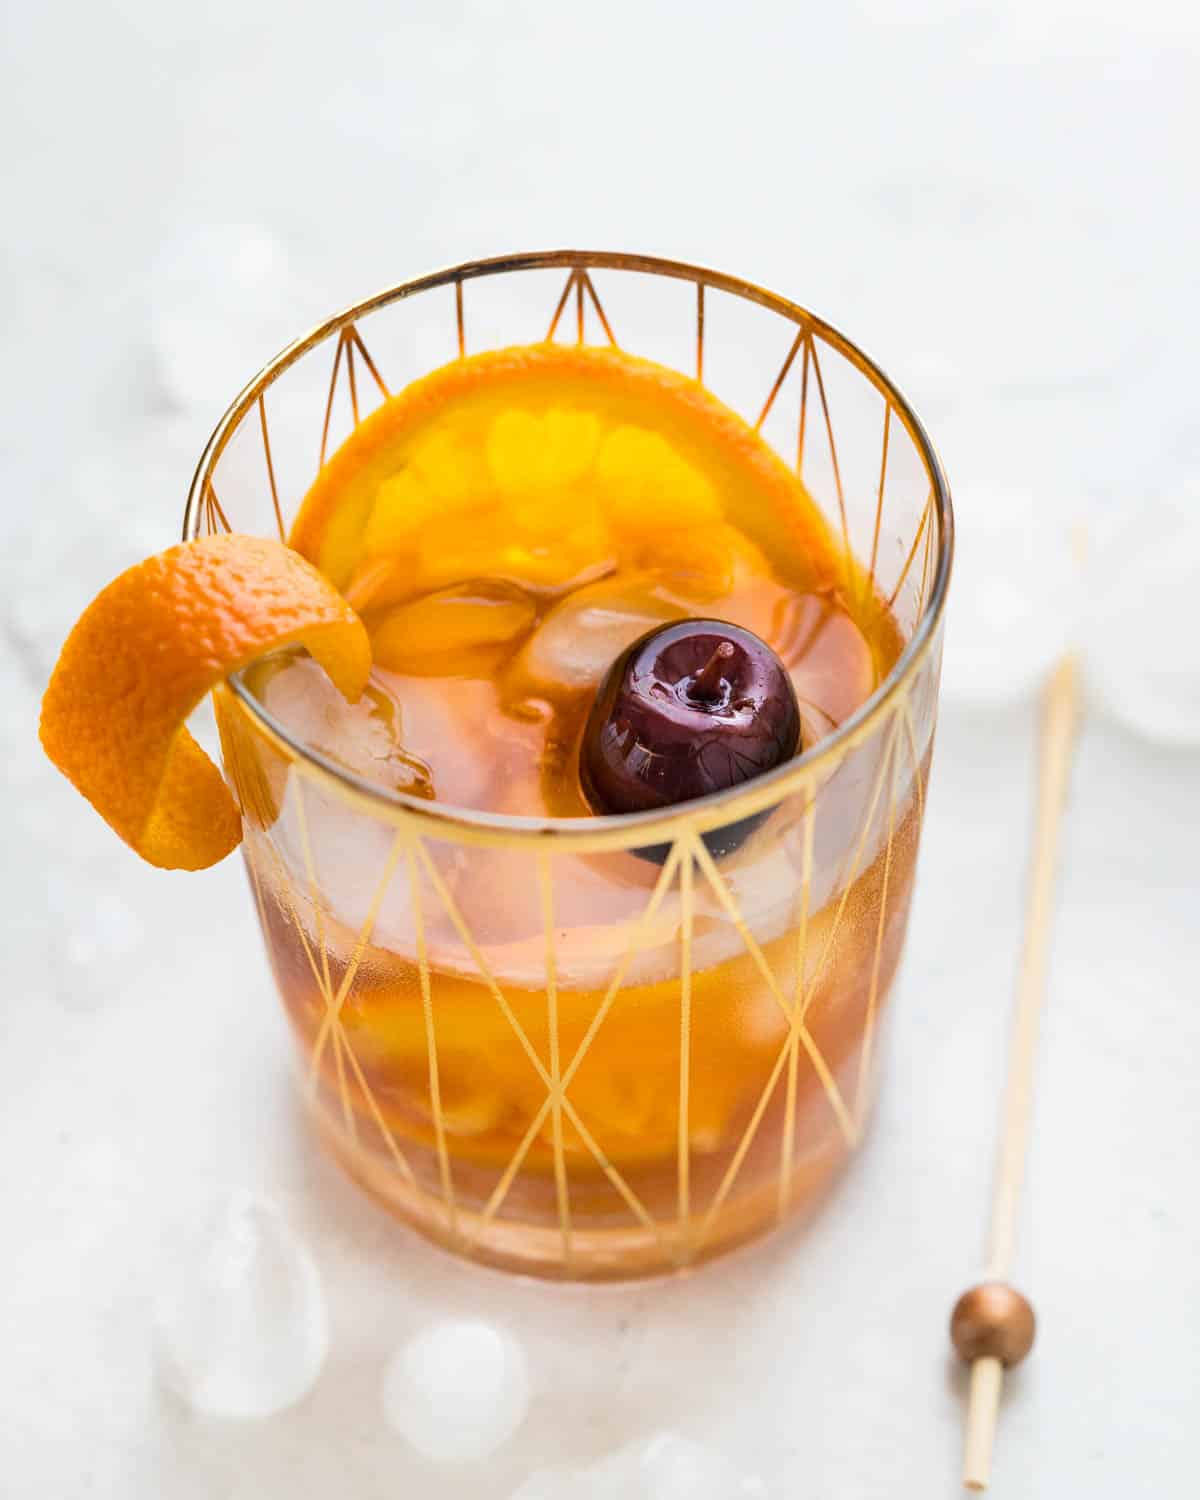 A Spiced Christmas Old Fashioned with Orange slice and amarena cherry.